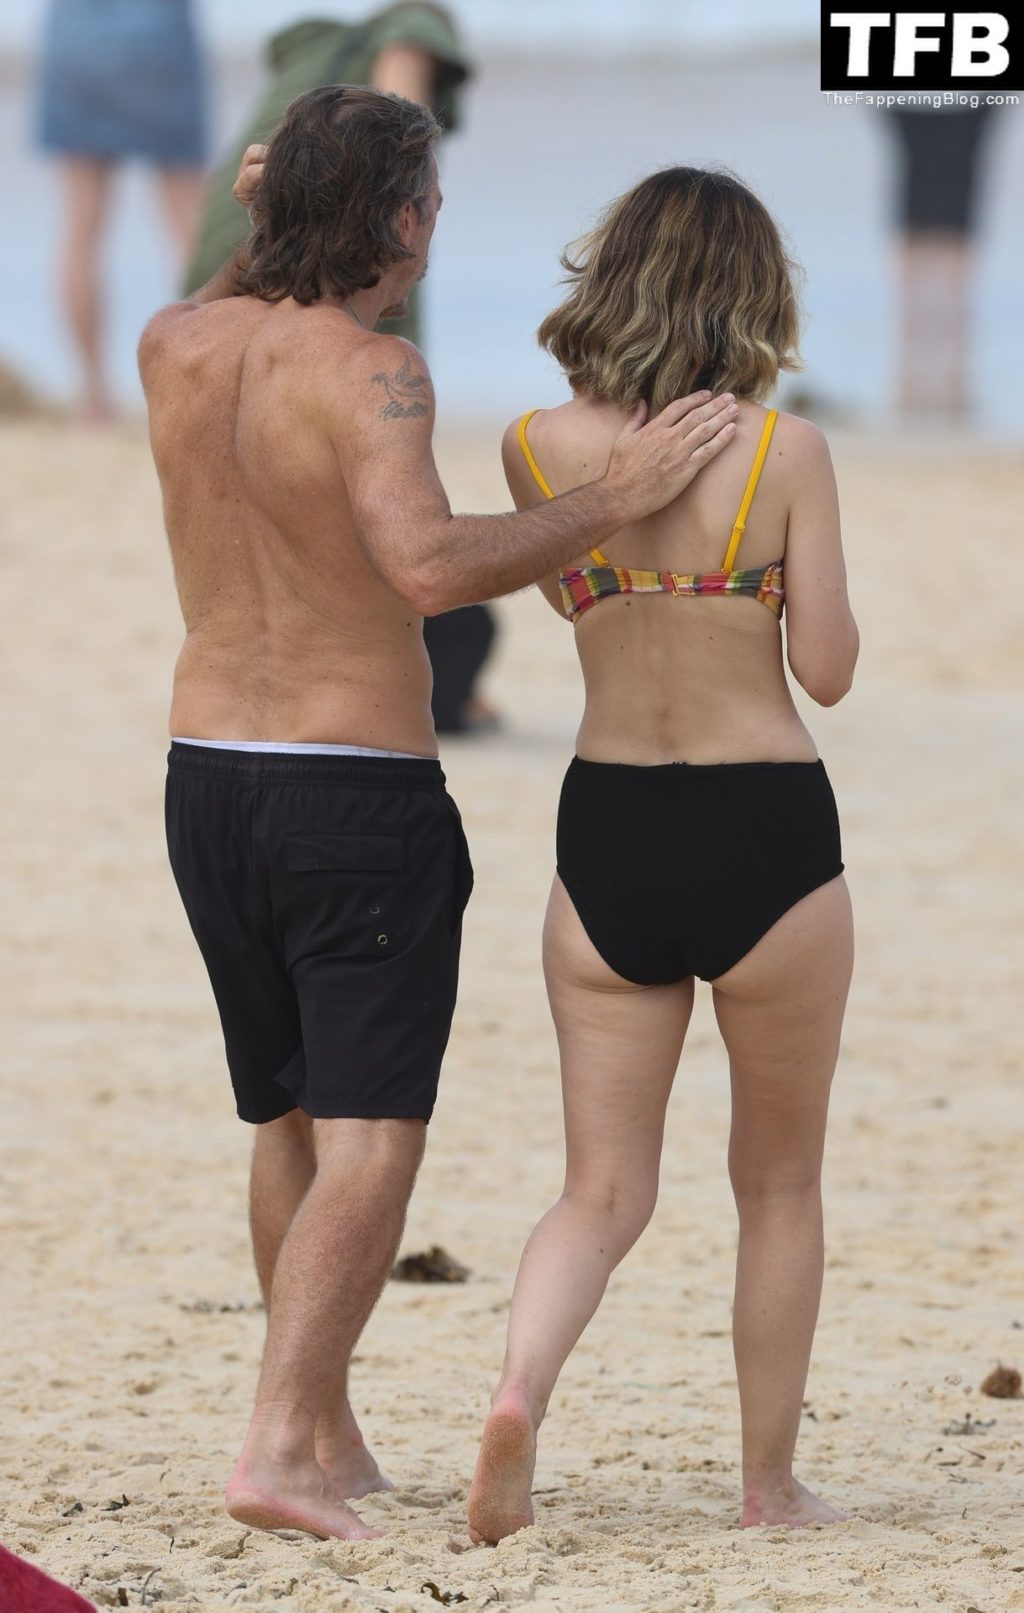 Rose Byrne Sexy The Fappening Blog 31 1024x1613 - Rose Byrne & Kick Gurry Enjoy a Day on the Beach in Sydney (90 Photos)